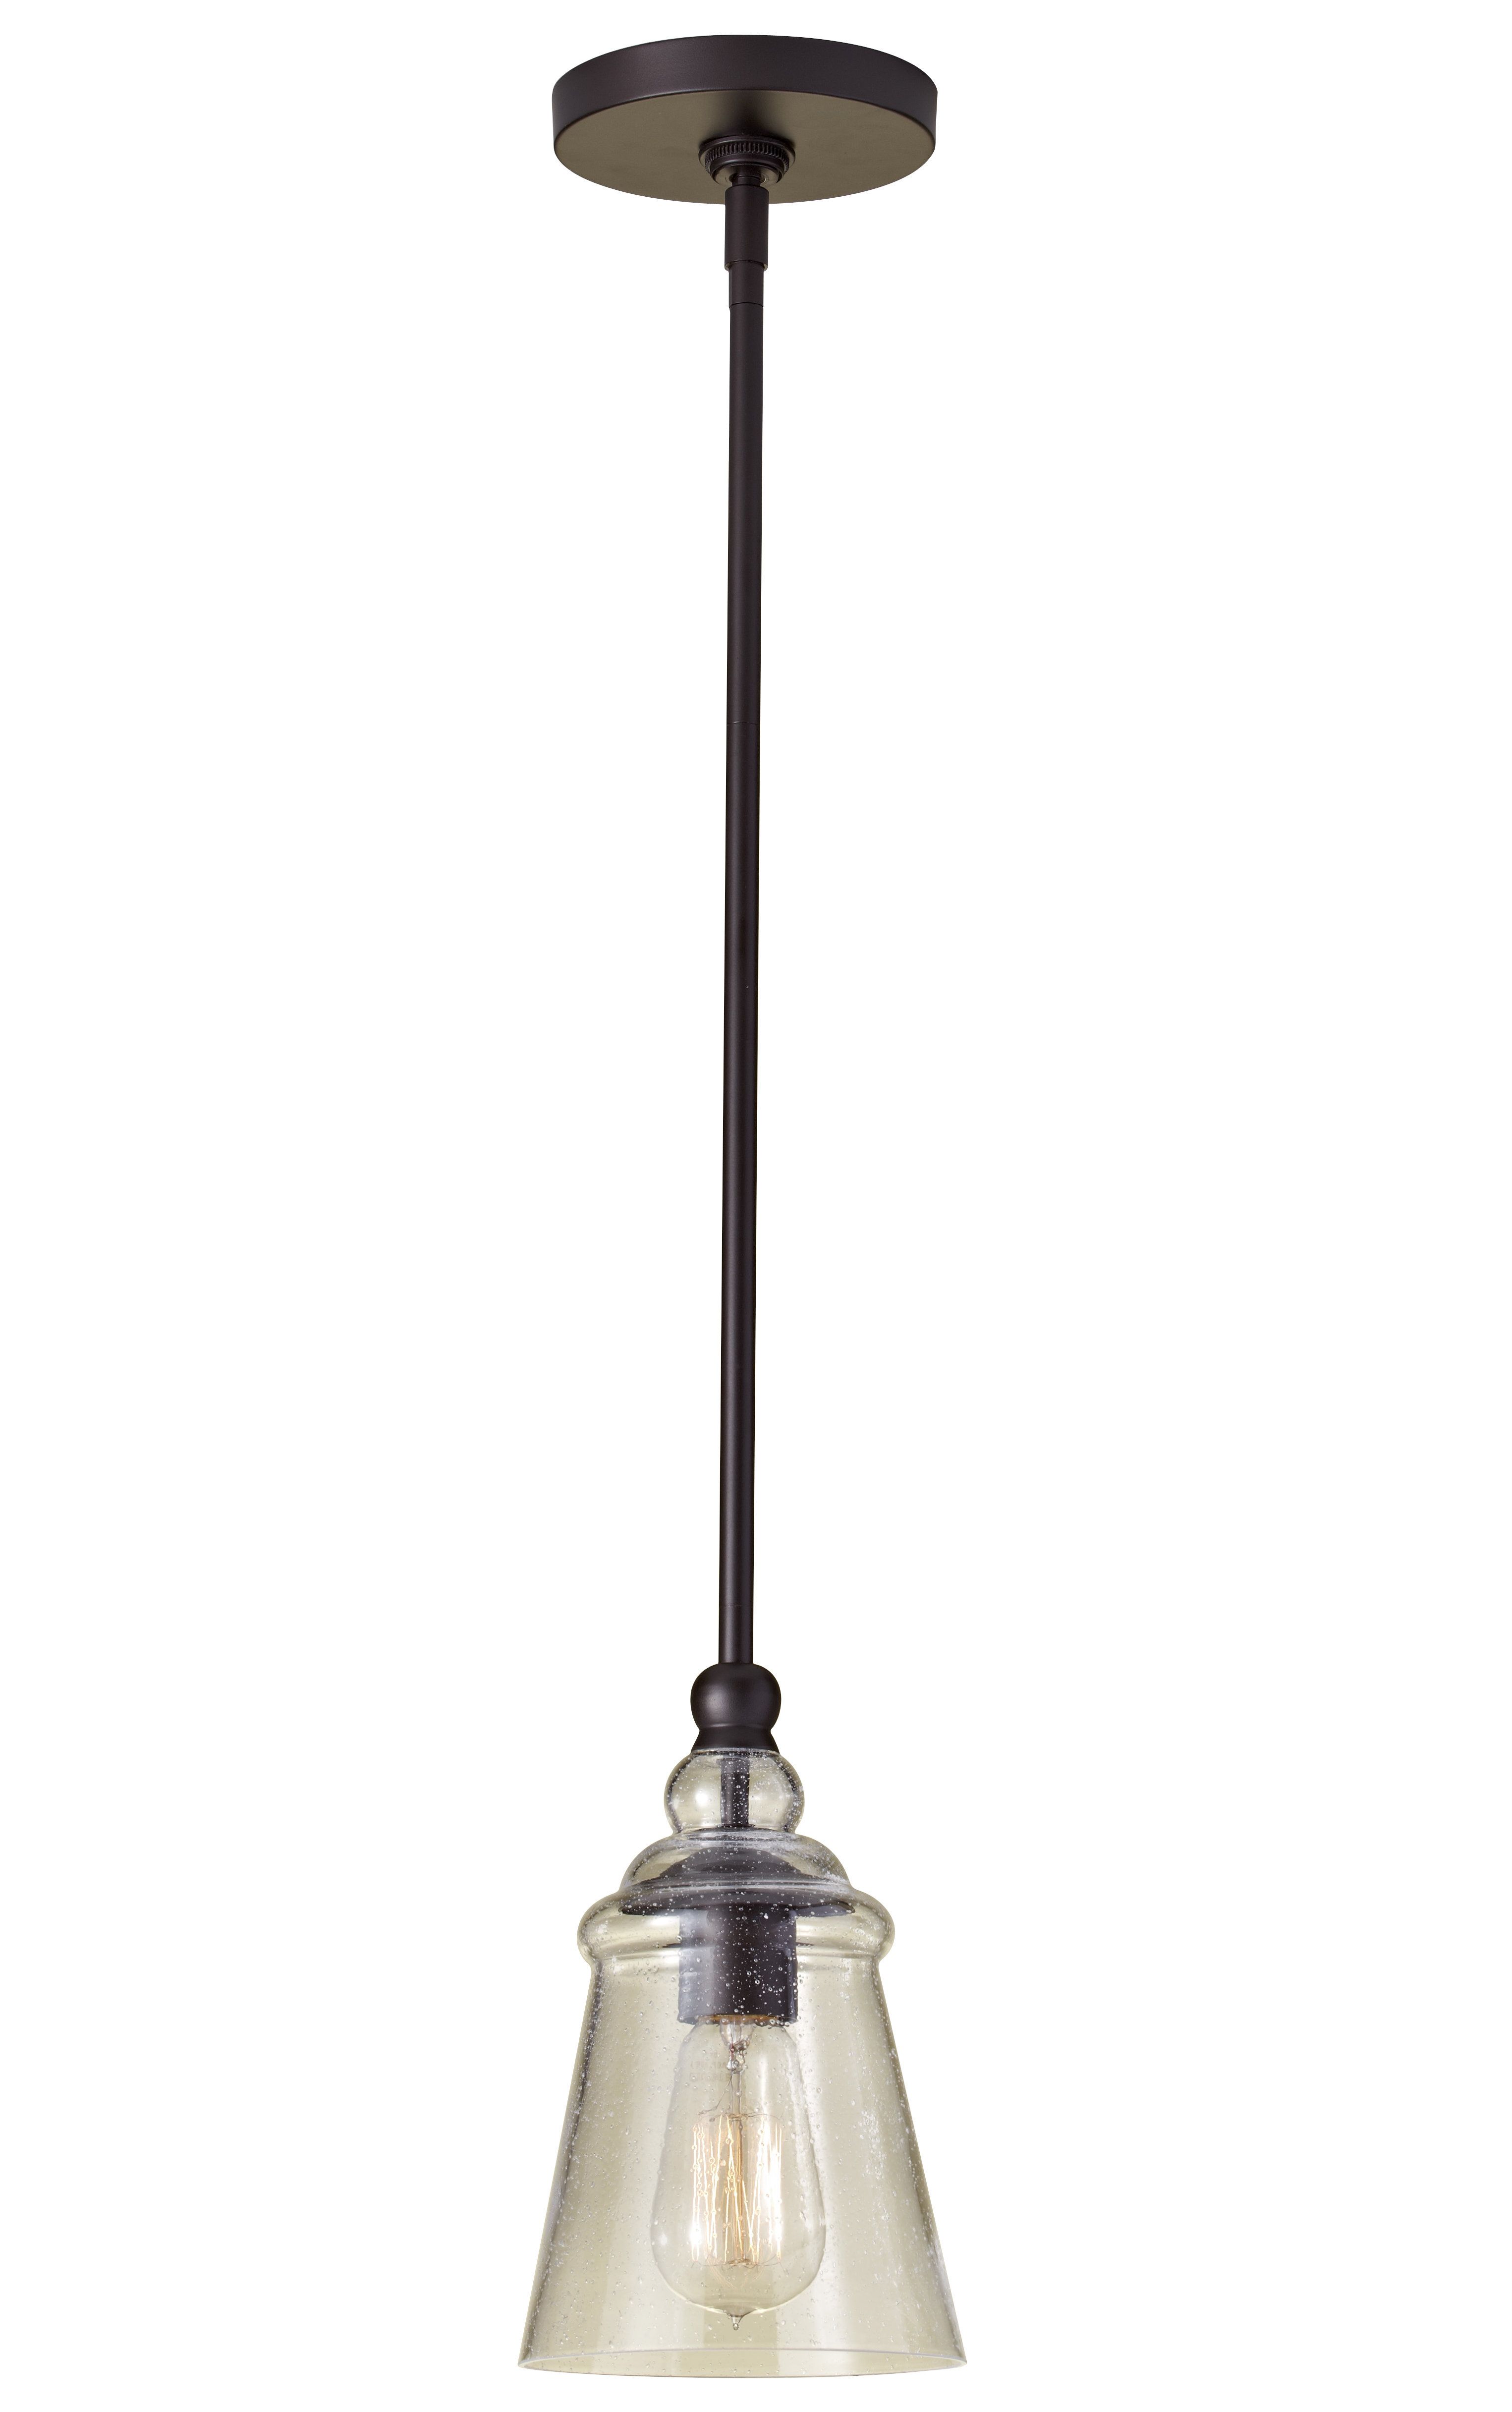 Sargent 1 Light Single Bell Pendant Throughout Erico 1 Light Single Bell Pendants (View 4 of 30)